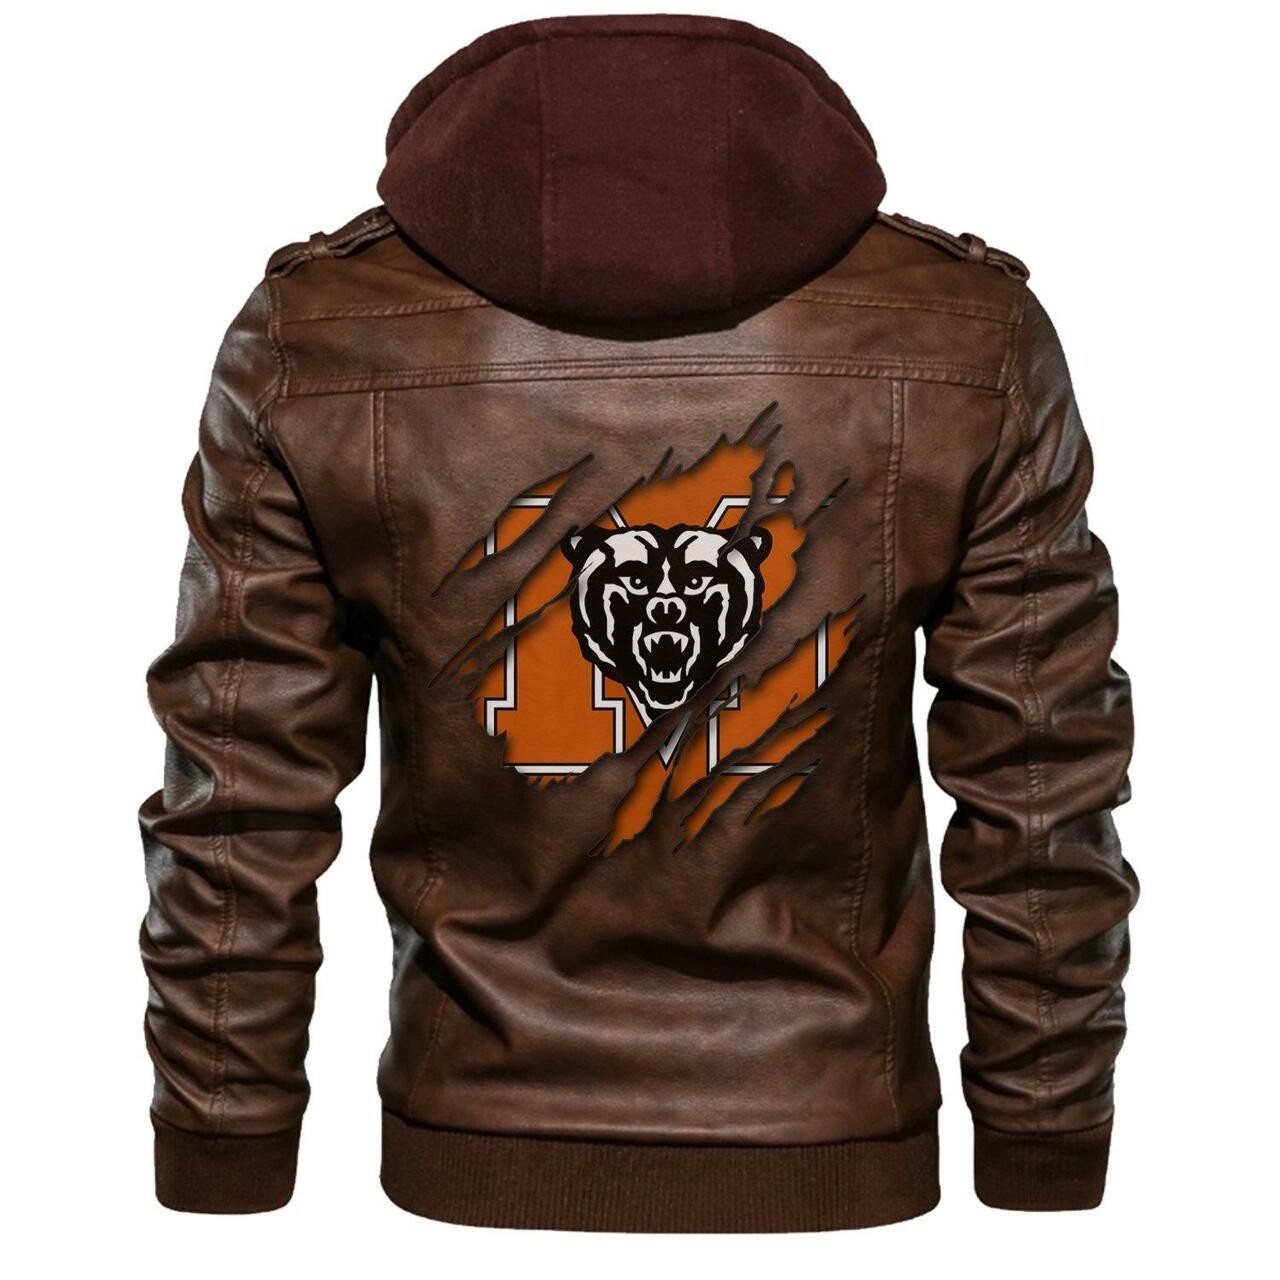 Don't wait another minute, Get Hot Leather Jacket today 65